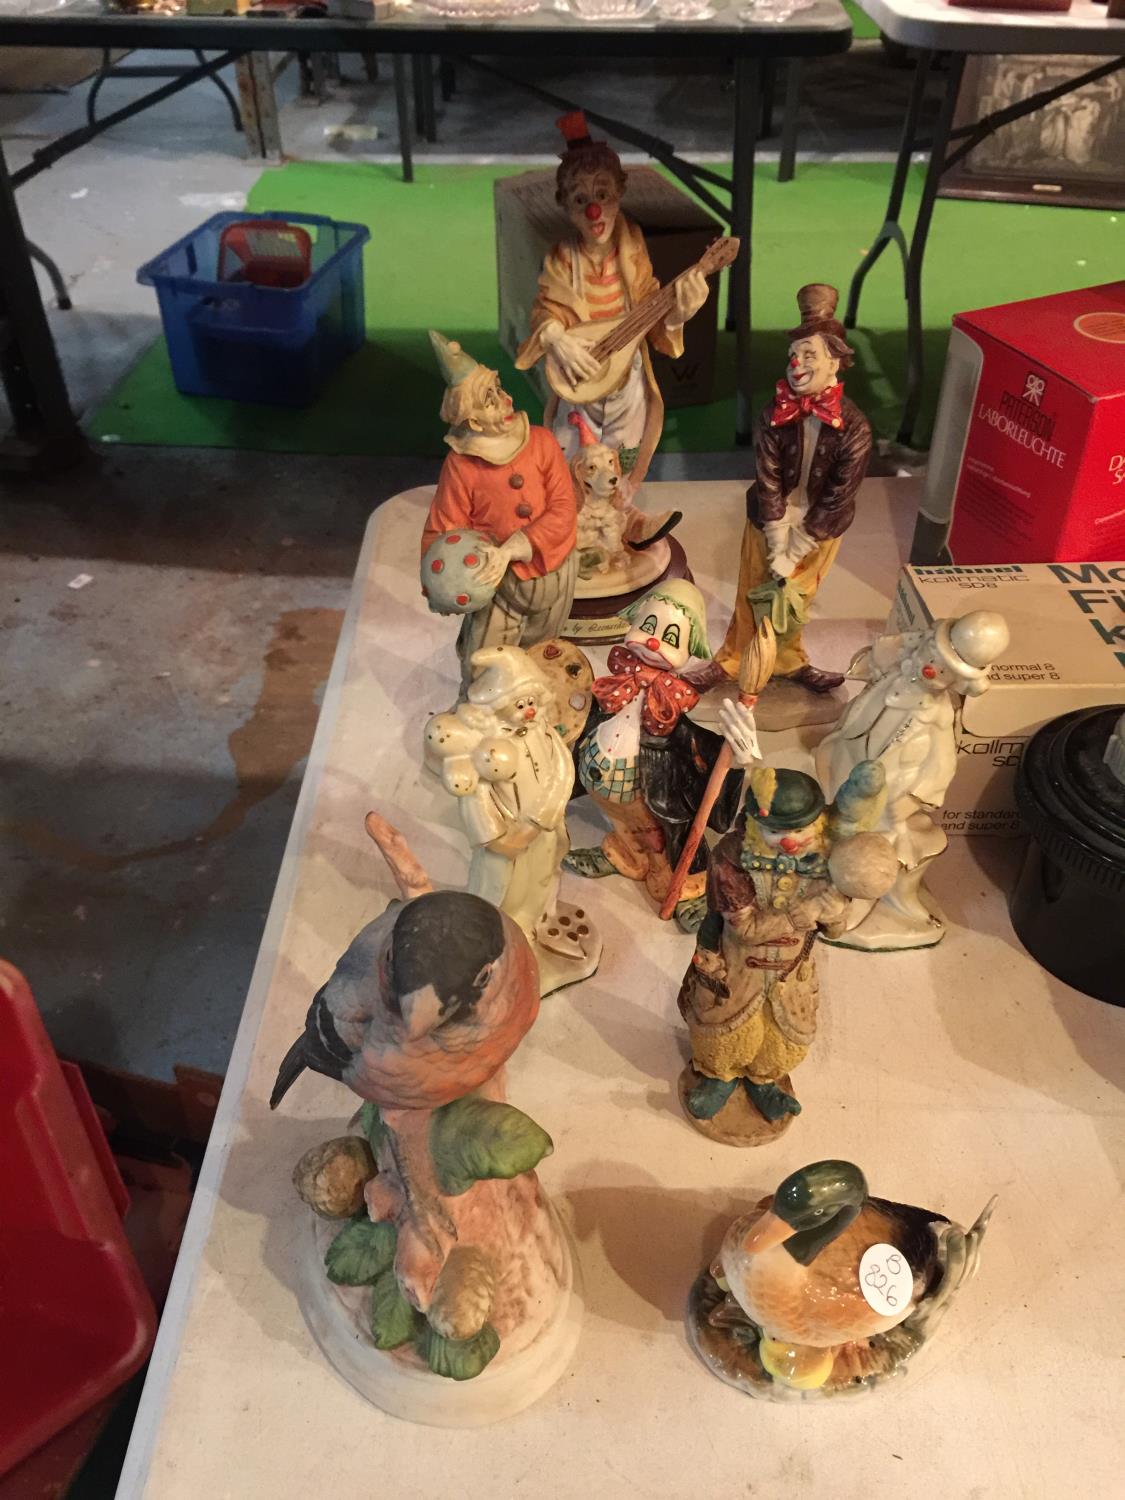 SEVEN CERAMIC FIGURES OF CLOWNS AND TWO BIRDS